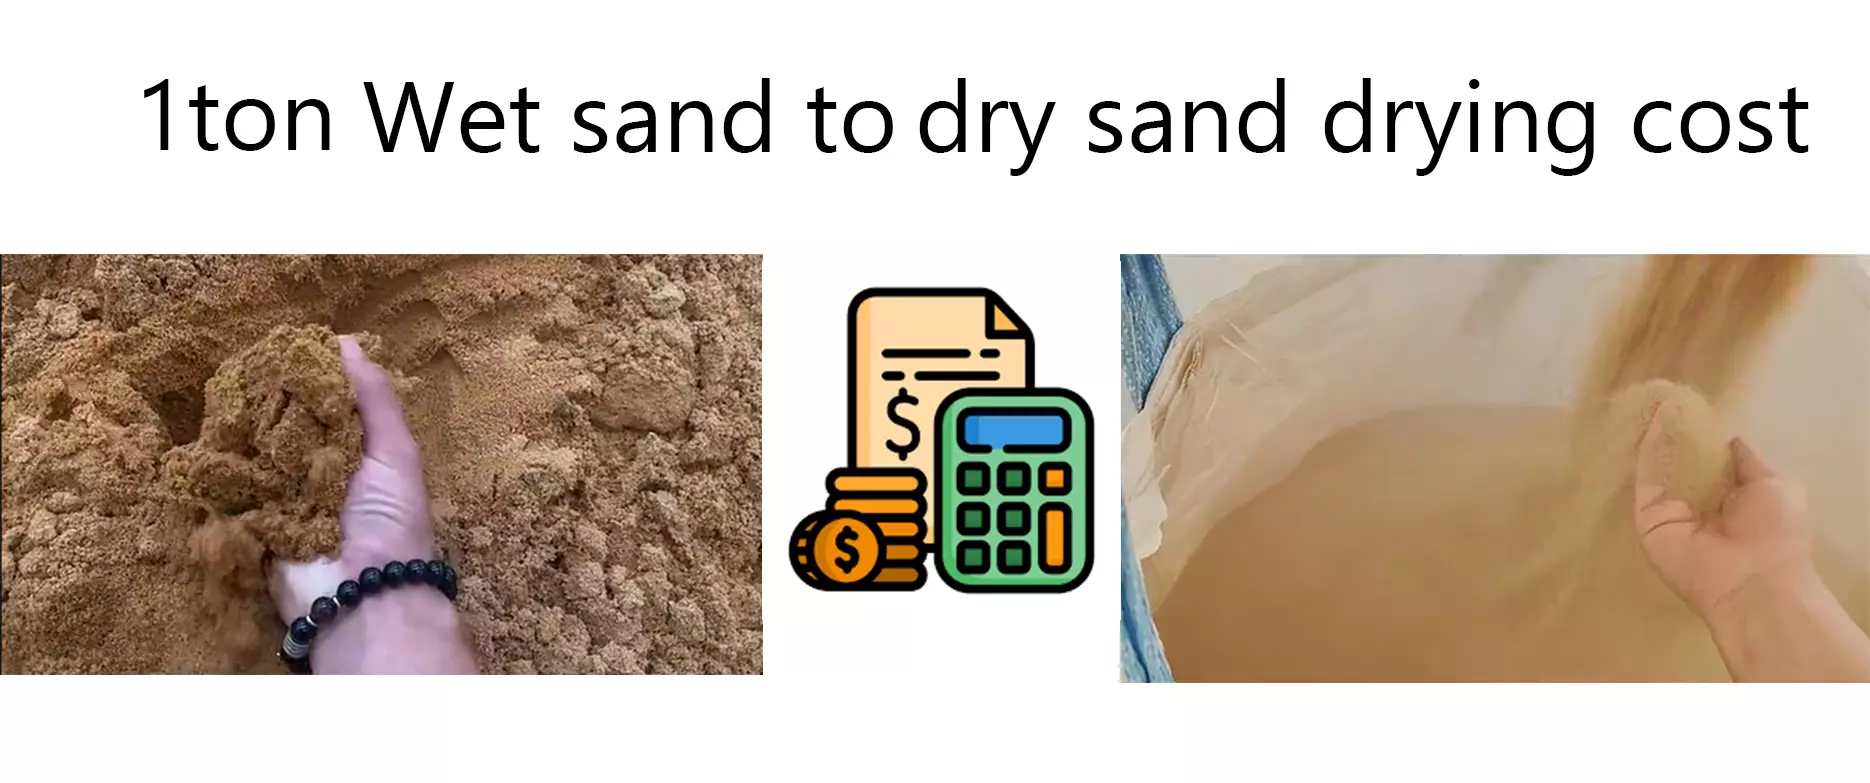 1ton wet sand to dry sand drying cost analysis